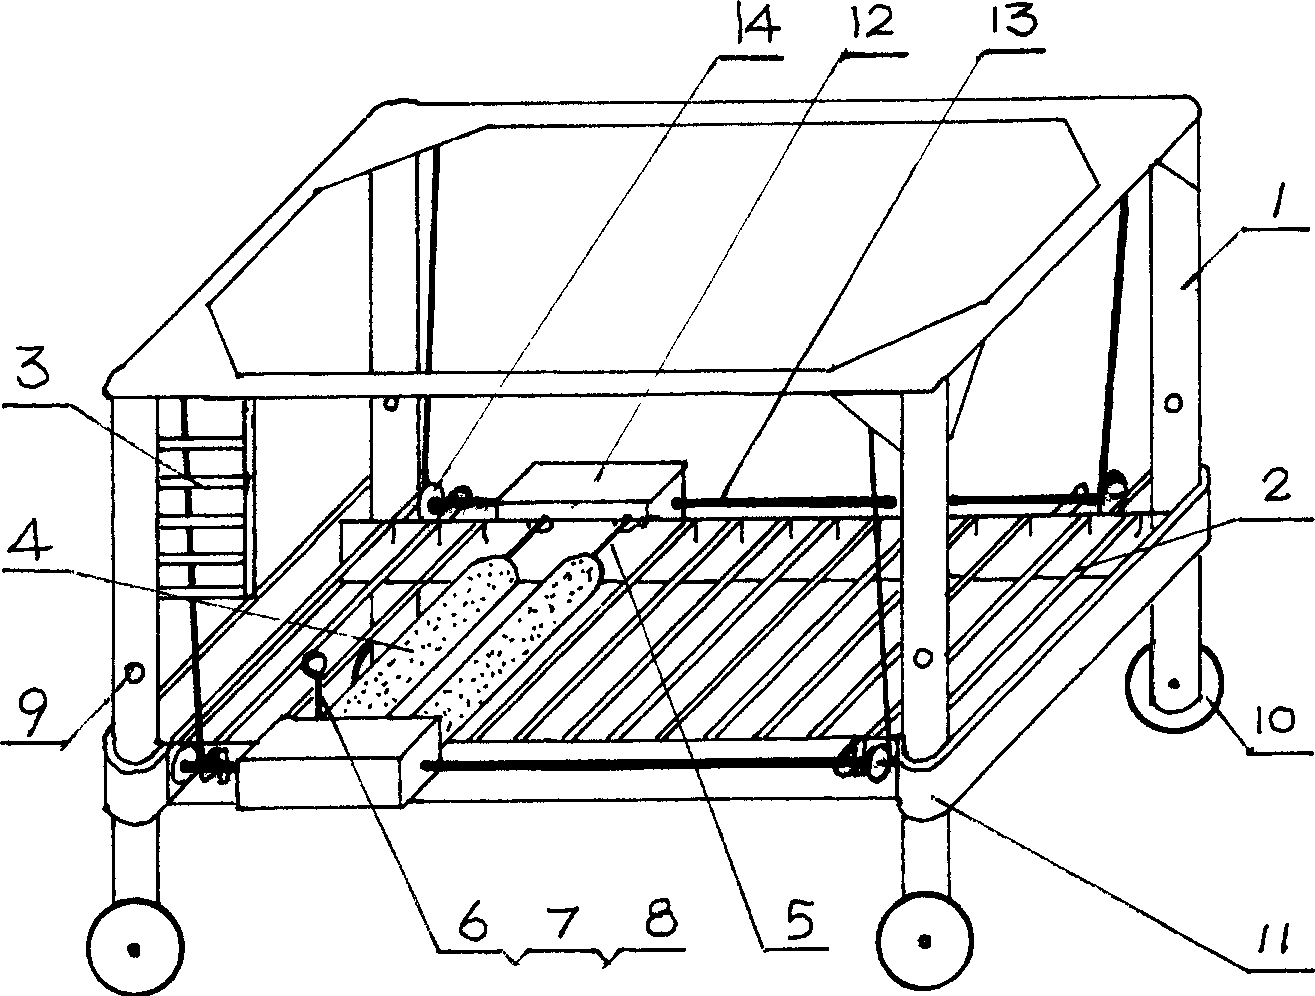 Automobile powered lifting device